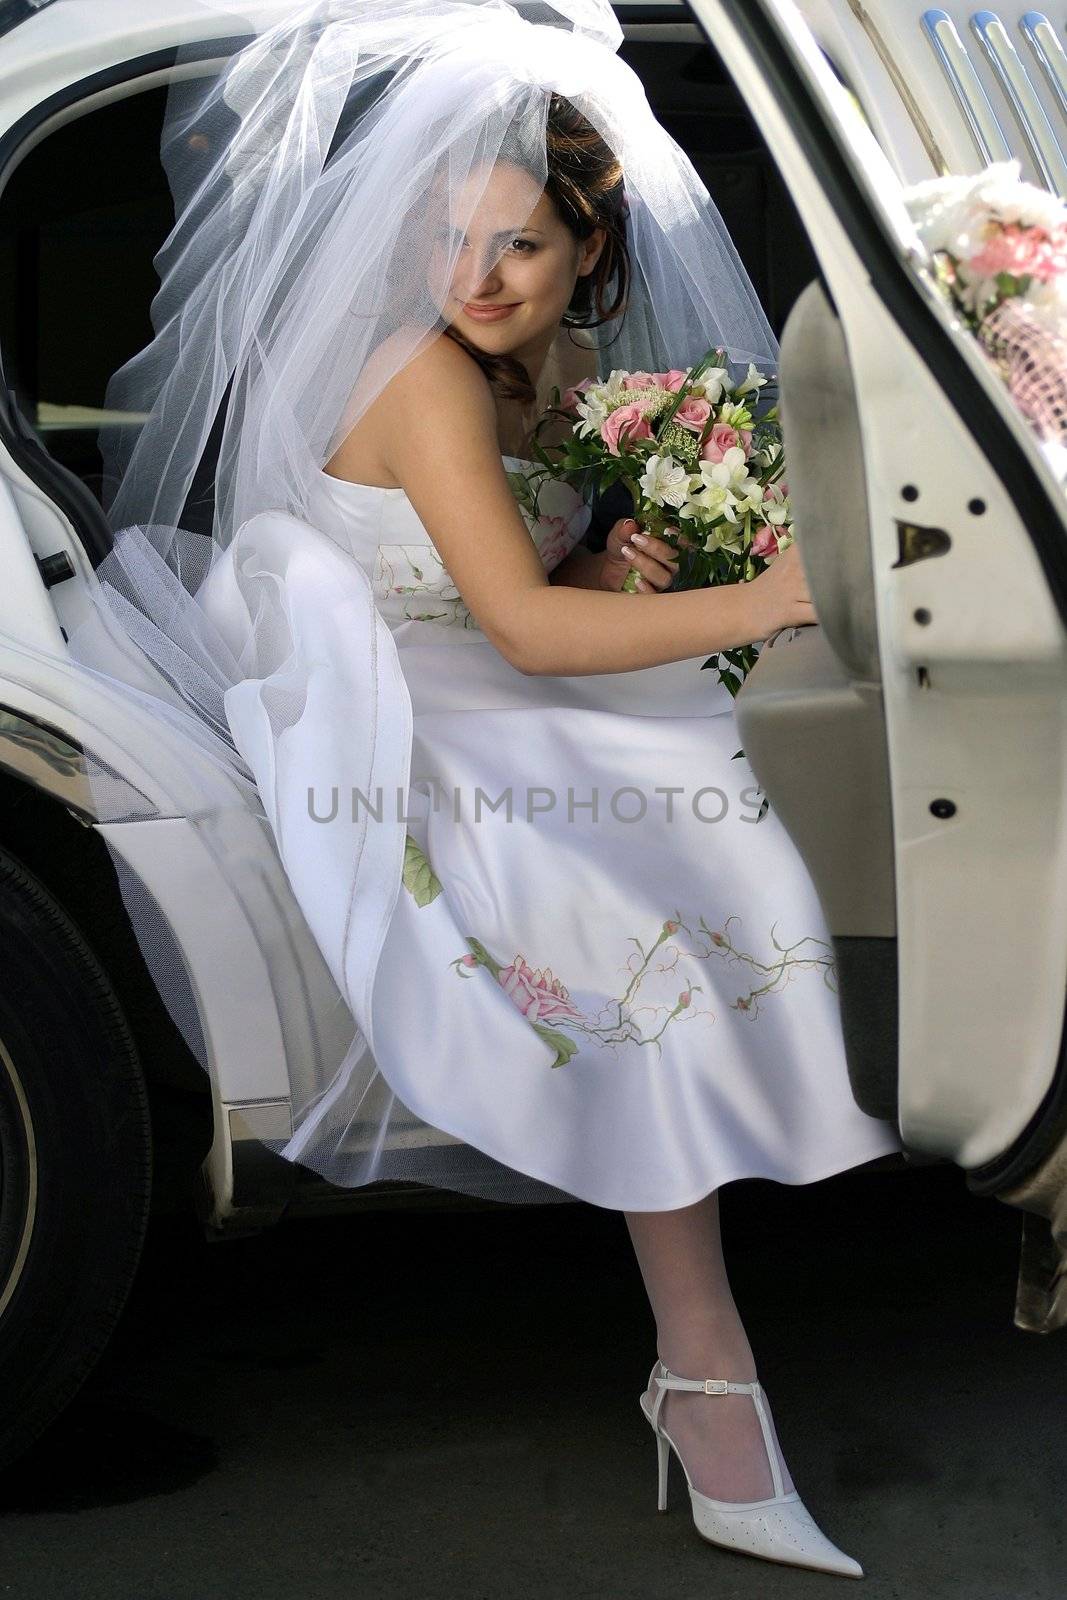 Smiling bride in wedding car limo by speedfighter